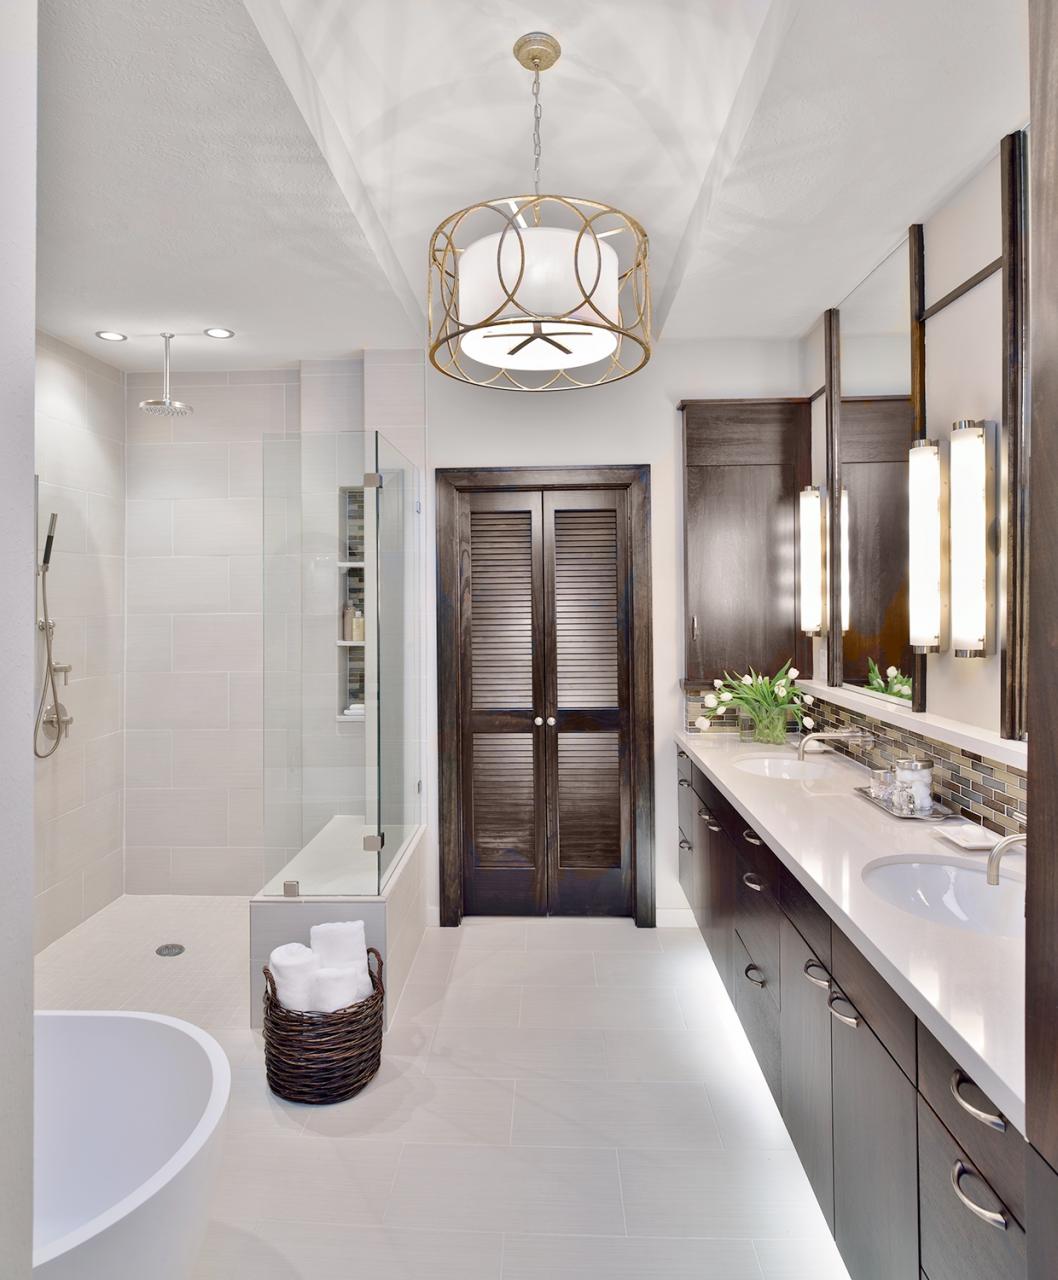 Remodeling a Master Bathroom? Consider These Layout Guidelines — DESIGNED